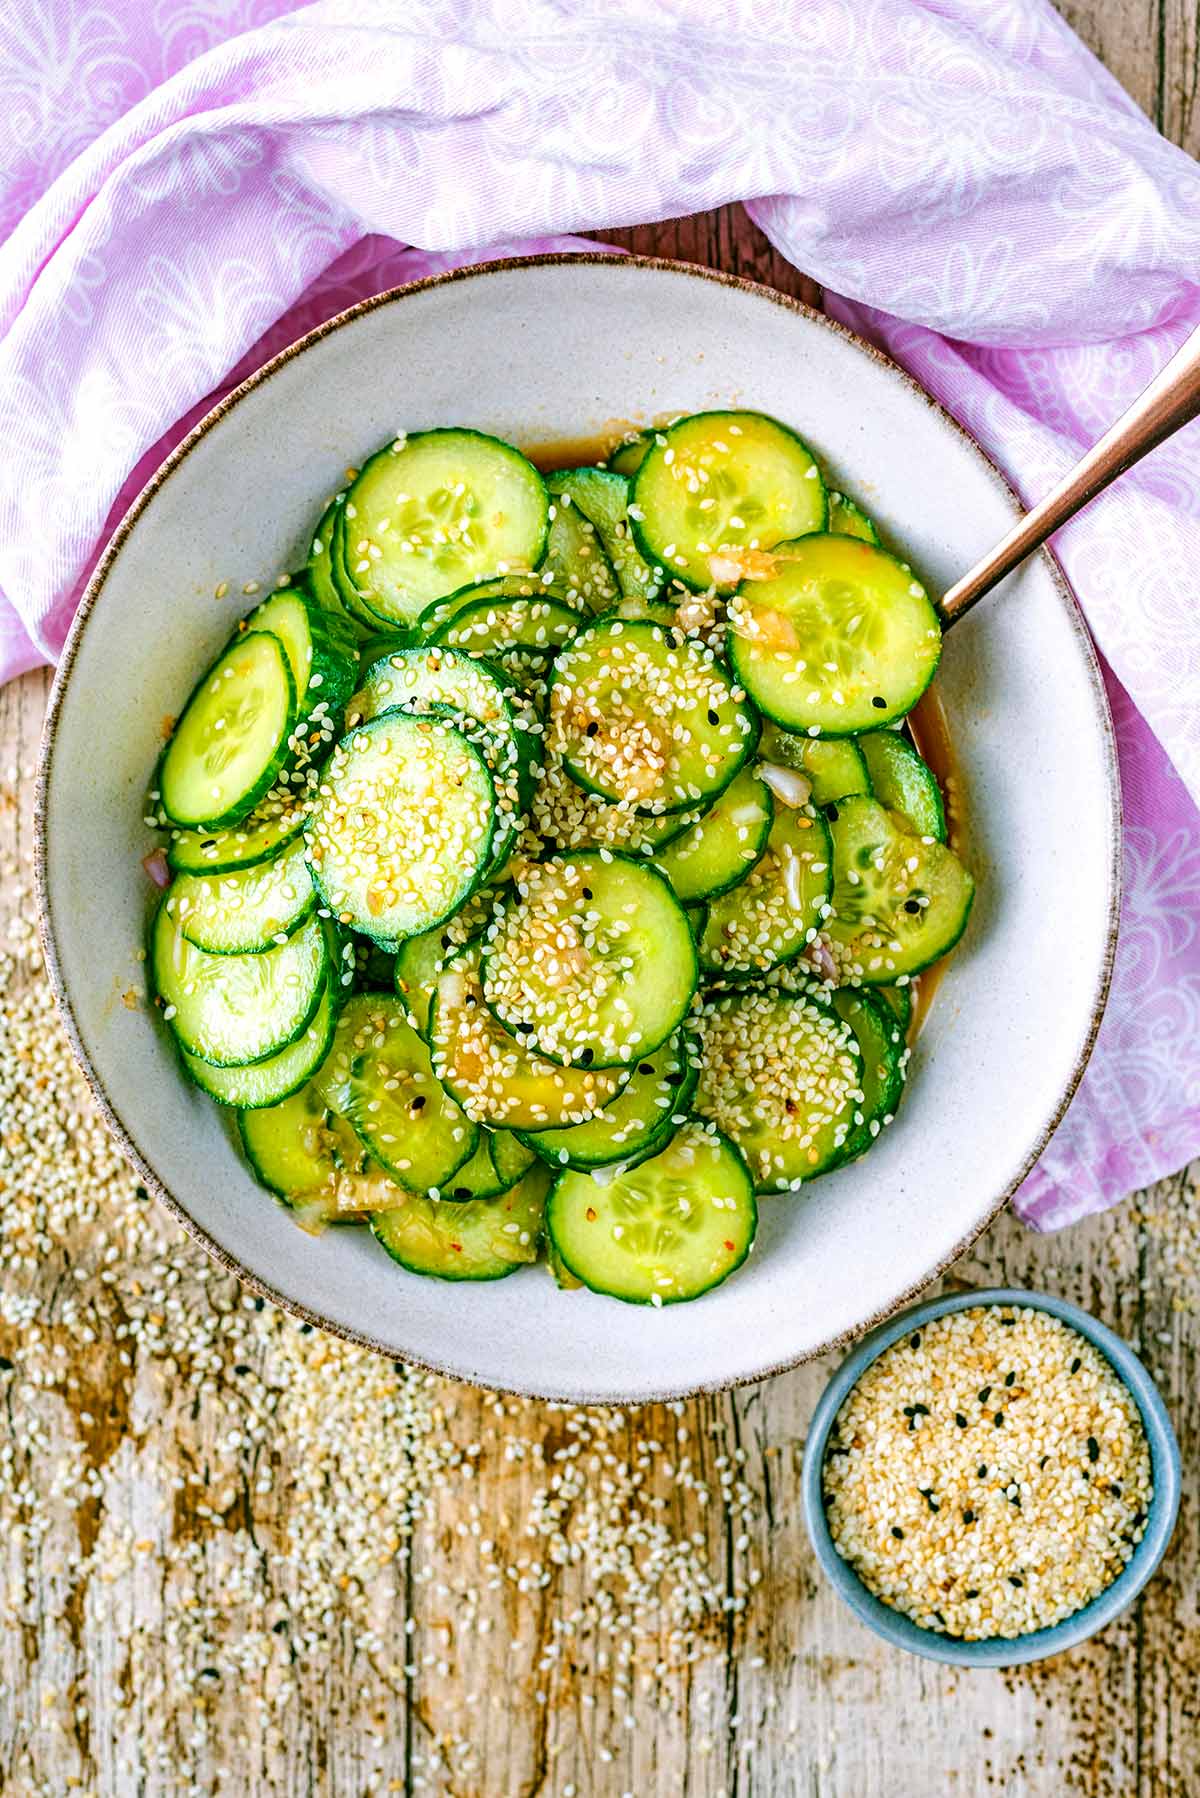 Asian cucumber salad in a bowl next to a pink towel.